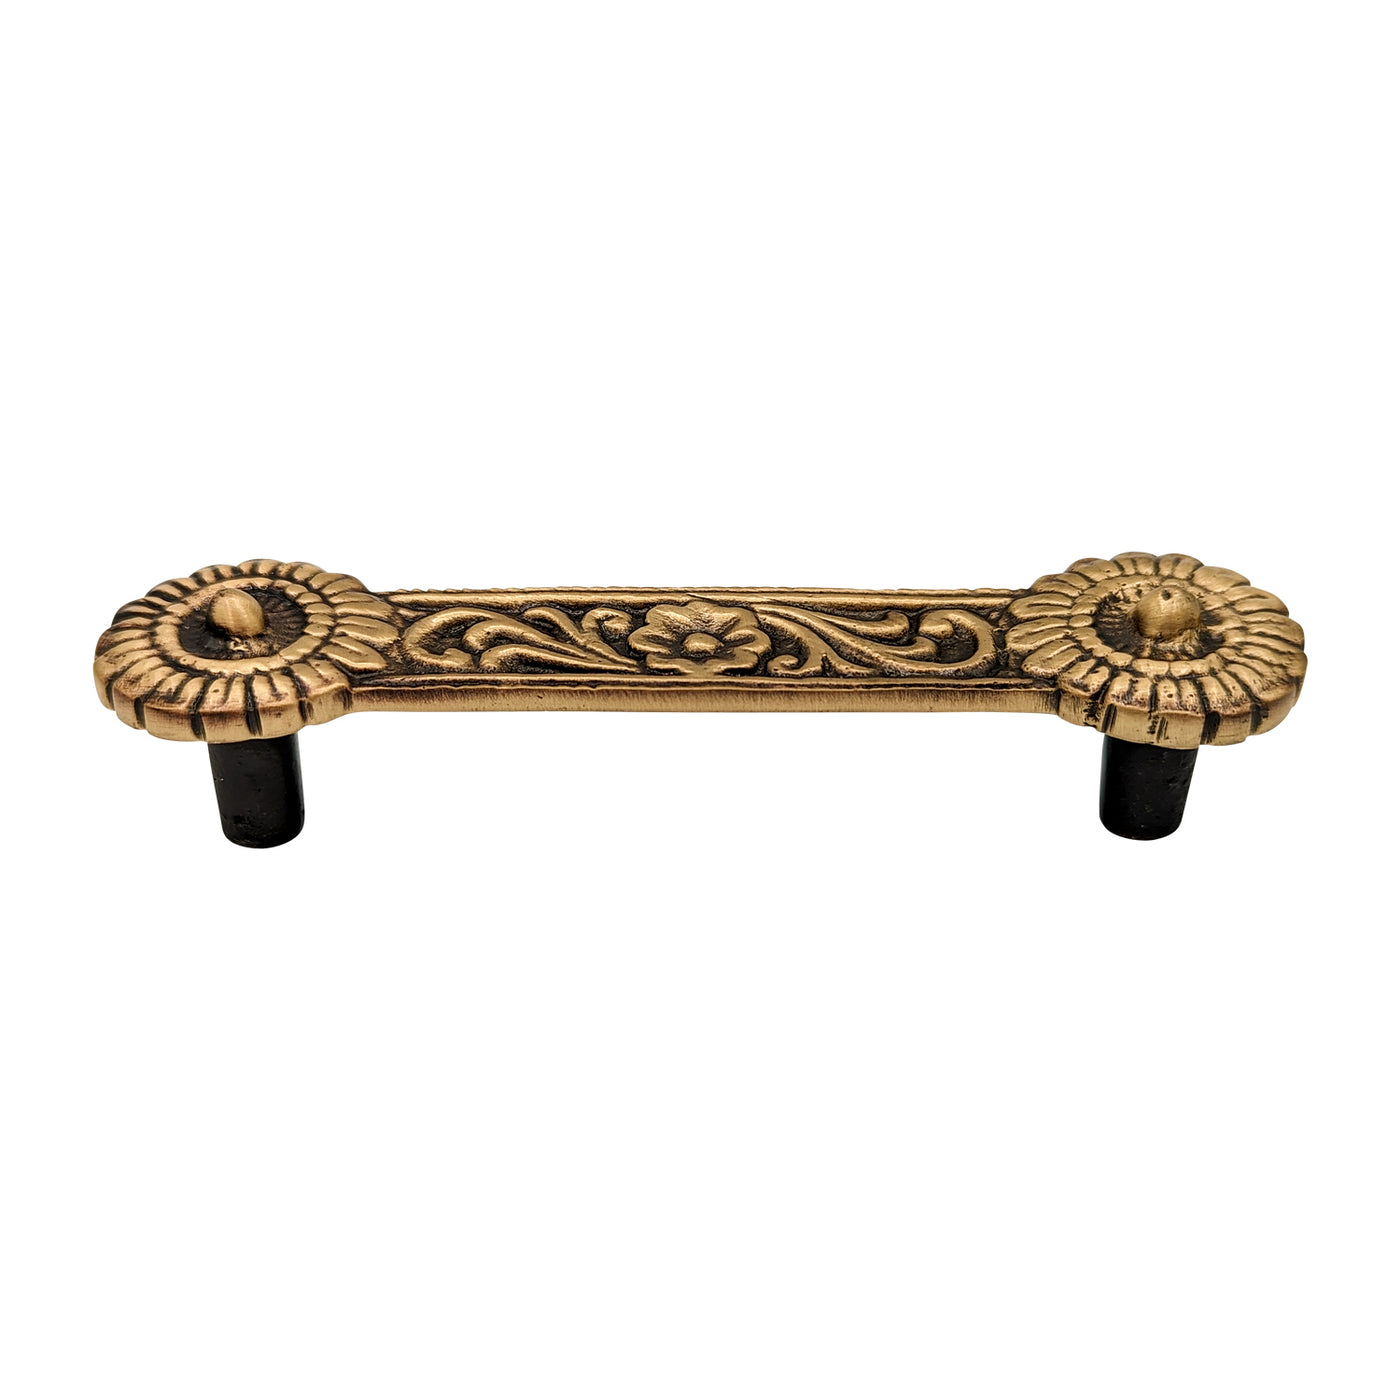 4 1/4 Inch Overall (3 3/8 Inch c-c) Solid Brass Unique Circle Pull Handle (Antique Brass Finish)